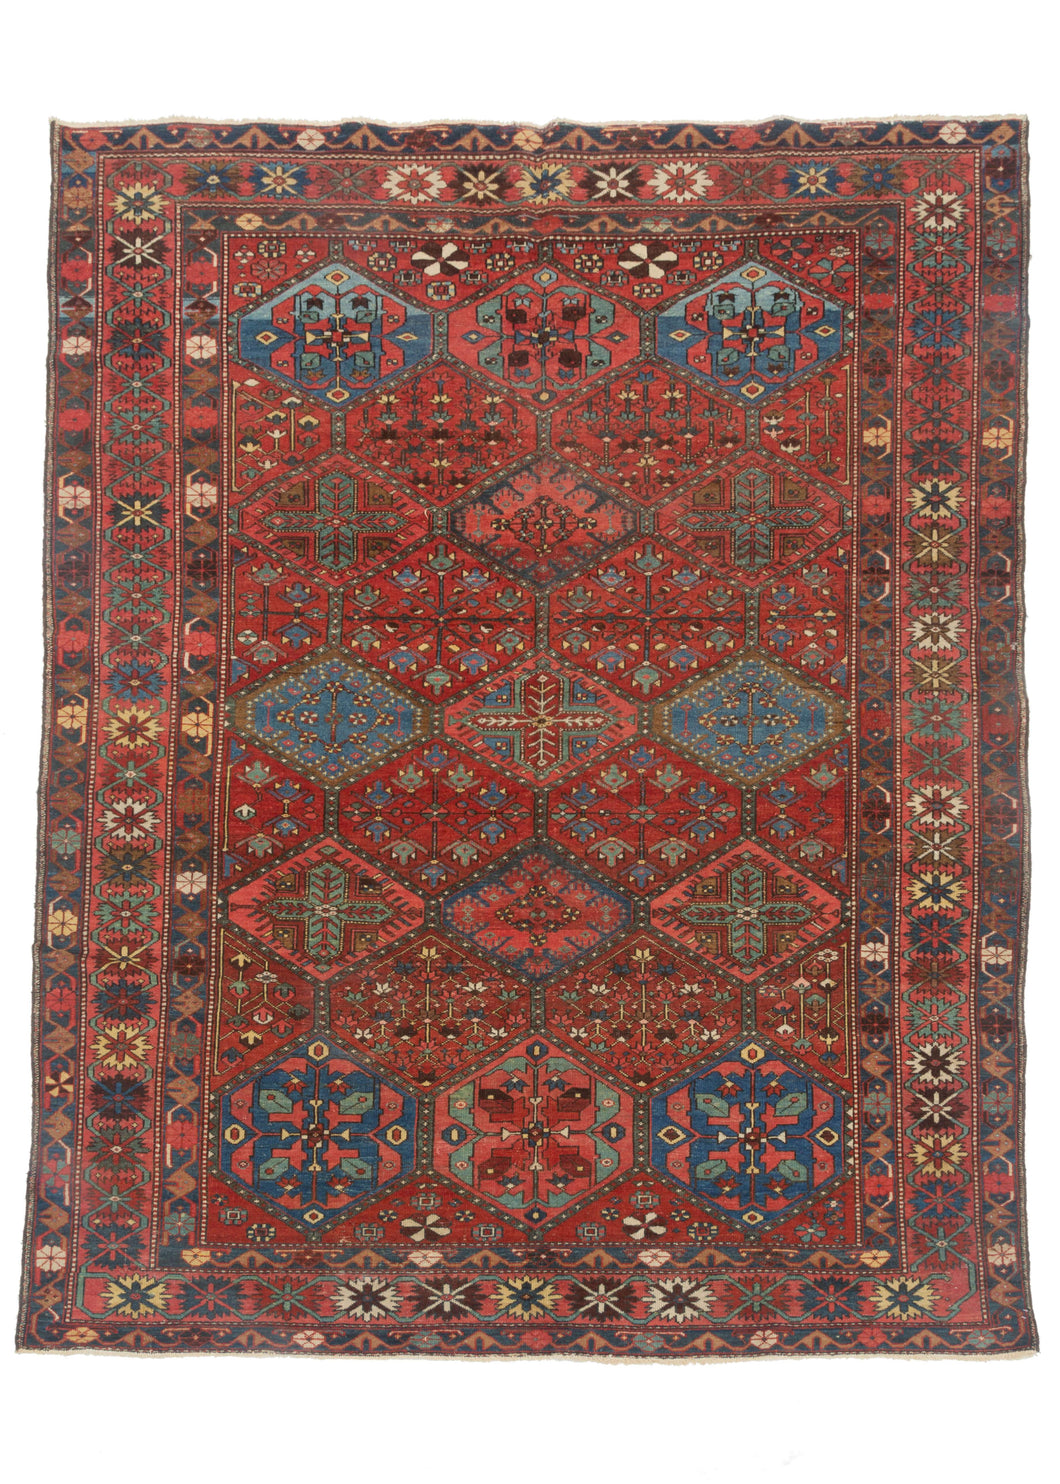 Antique Persian Bakhtiari Area Rug with brilliant naturally dyed colors of the rainbow